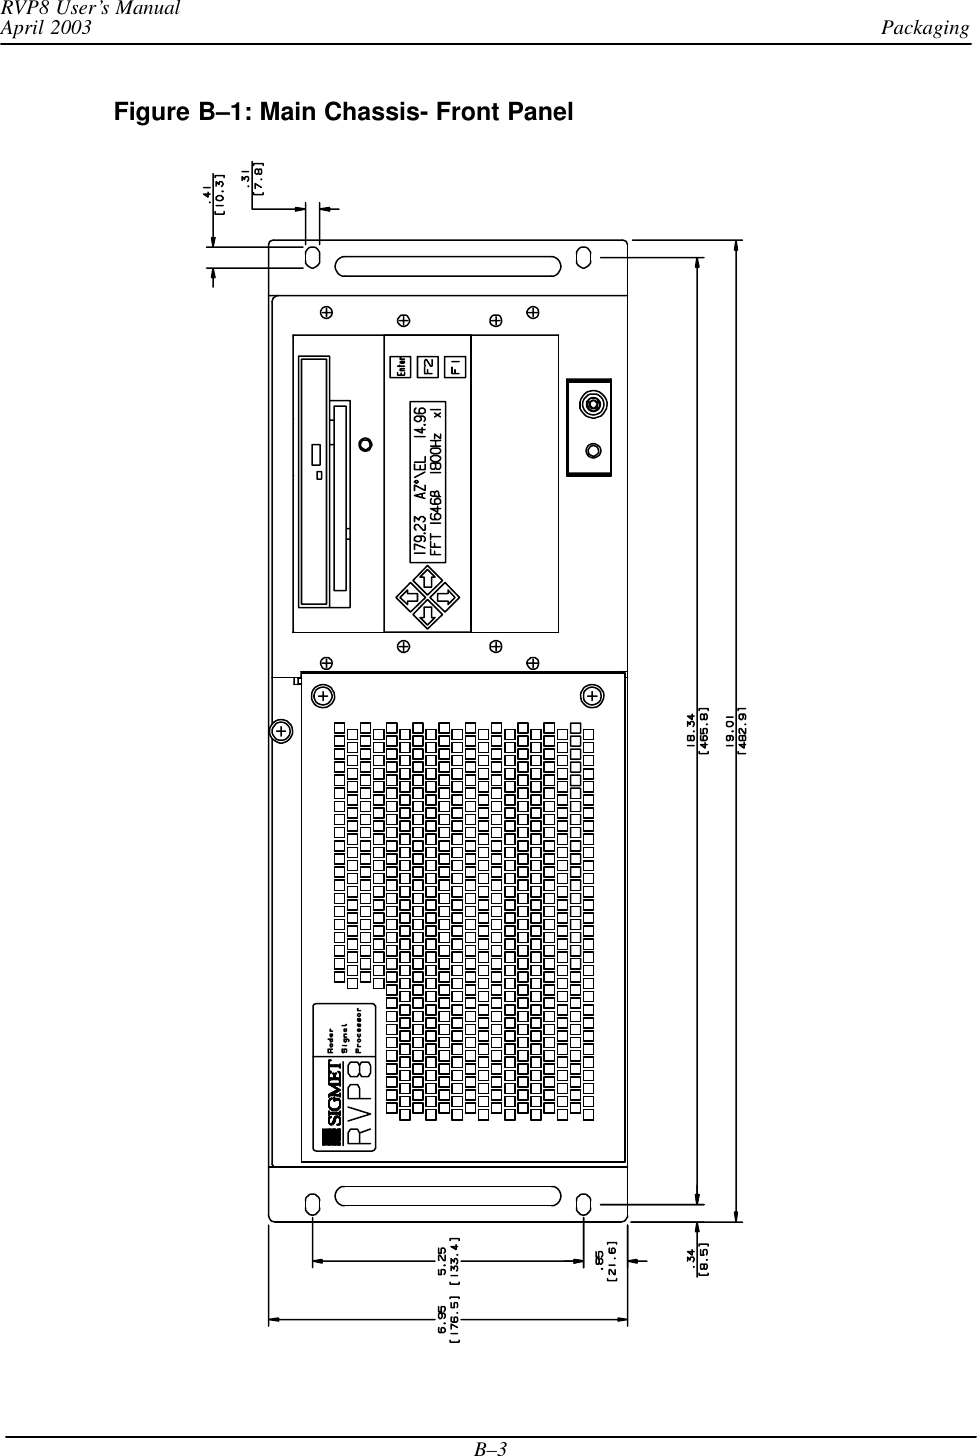 PackagingRVP8 User’s ManualApril 2003B–3Figure B–1: Main Chassis- Front Panel